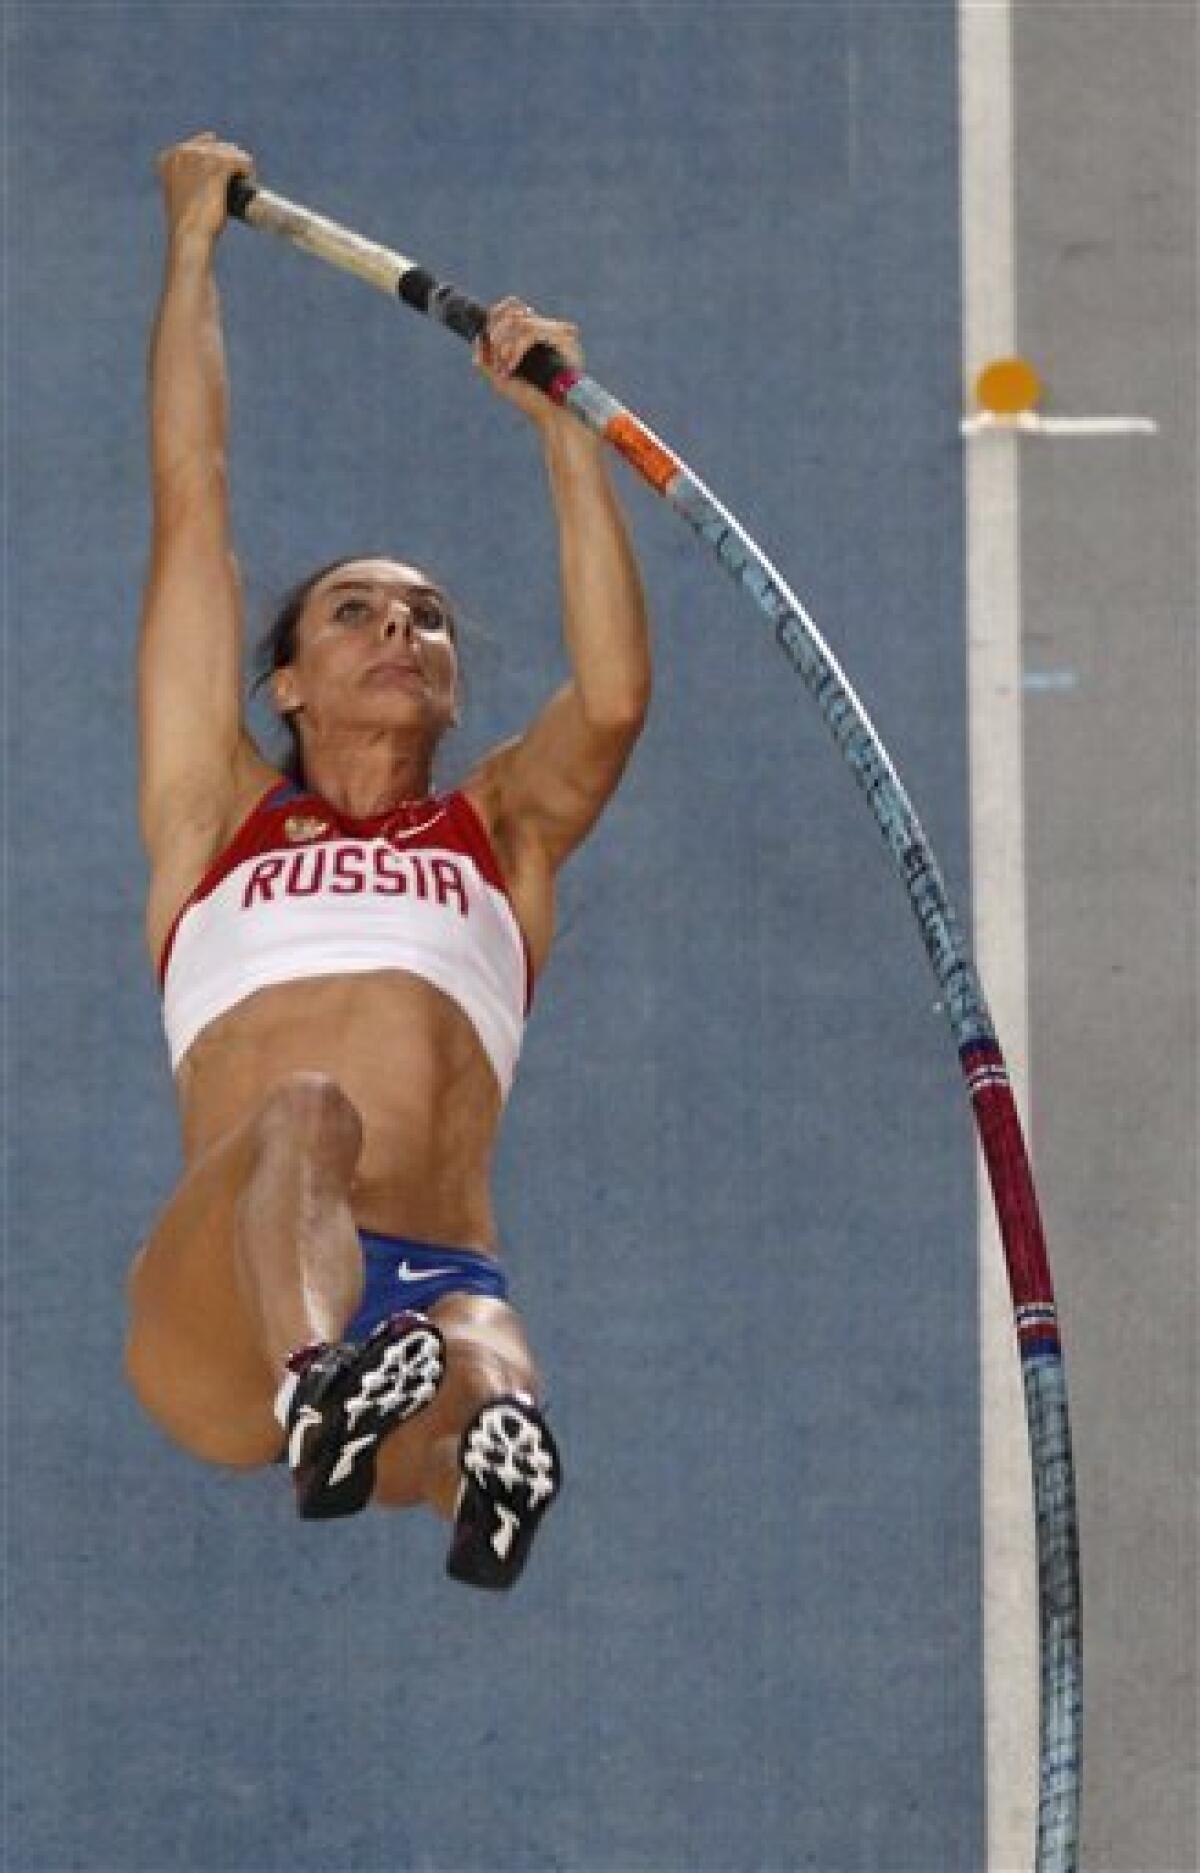 Russia's Yelena Isinbayeva makes an attempt in the Women's Pole Vault final .at the World Athletics Championships in Daegu, South Korea, Tuesday, Aug. 30, 2011. (AP Photo/Kevin Frayer)